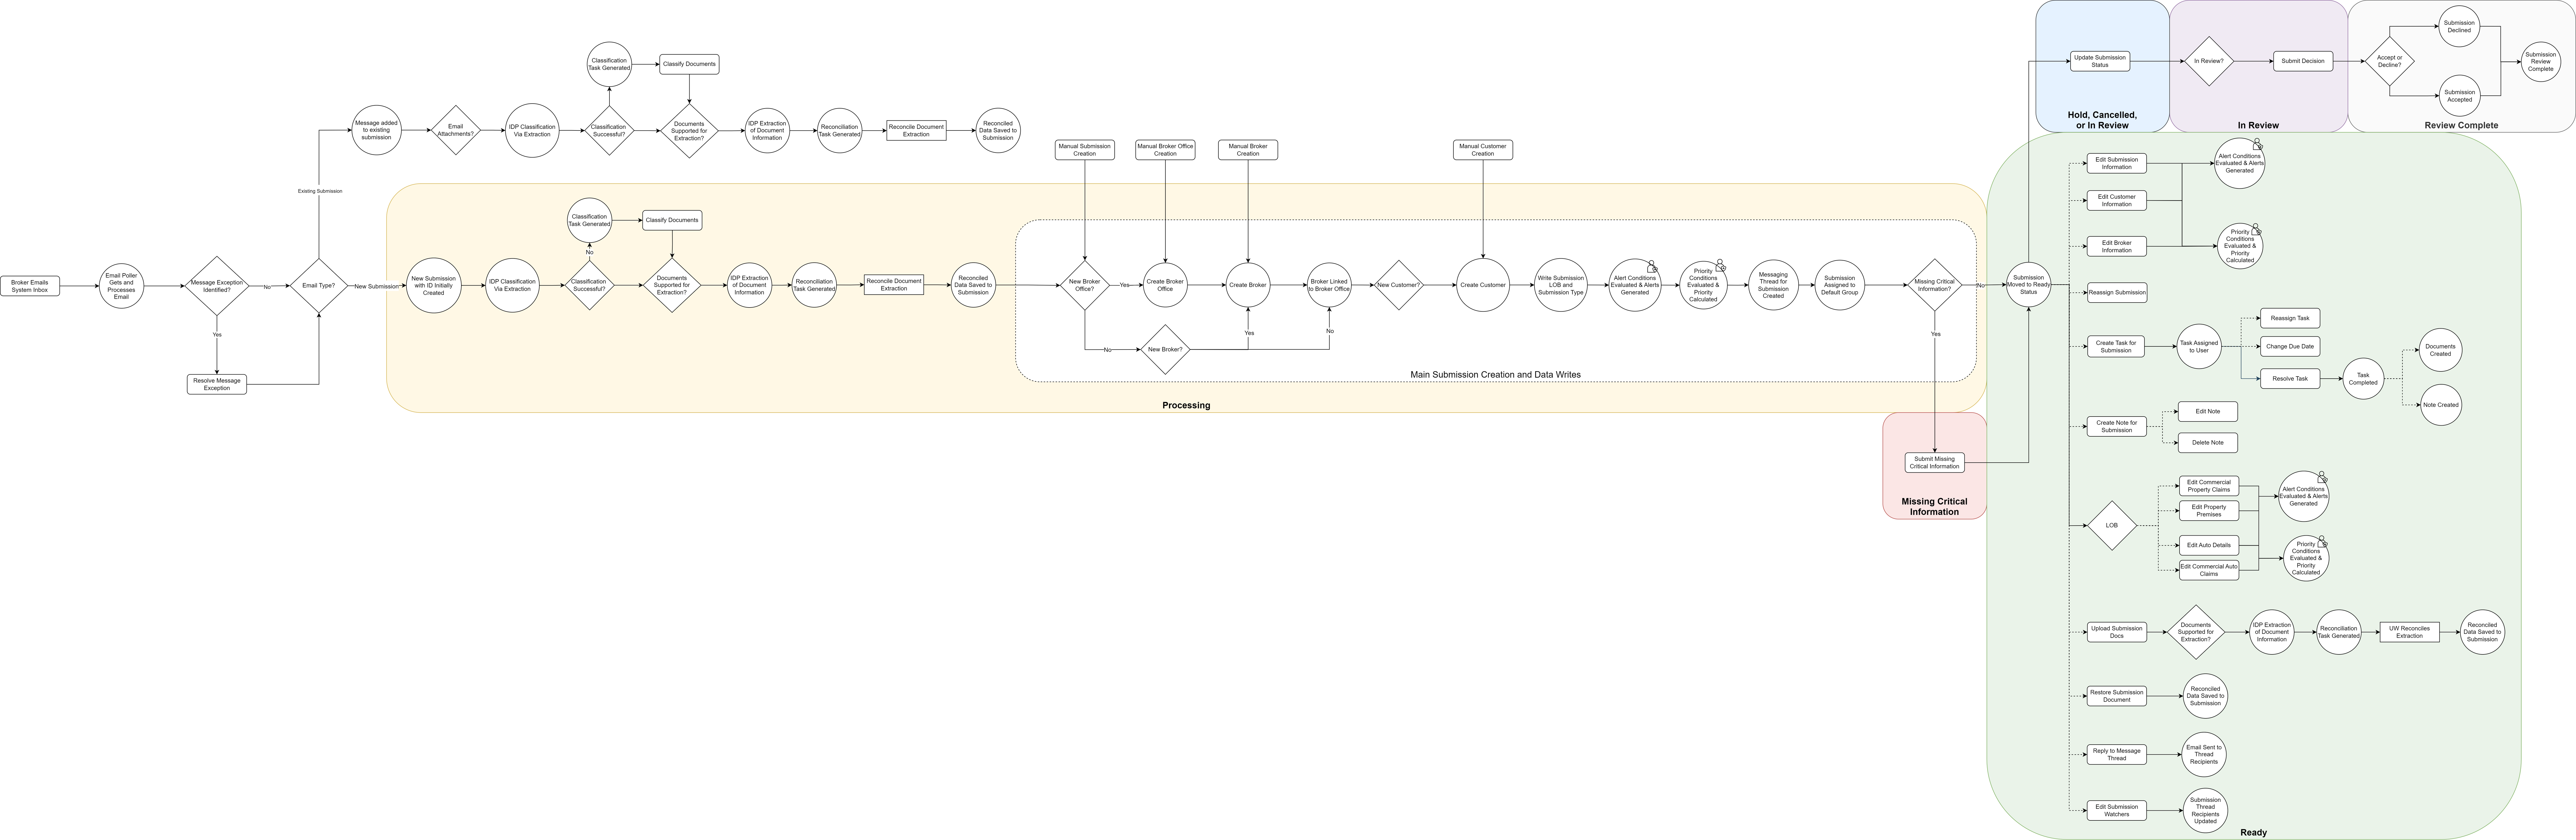 cu-user_flow-isu_overall_submission Flow.png